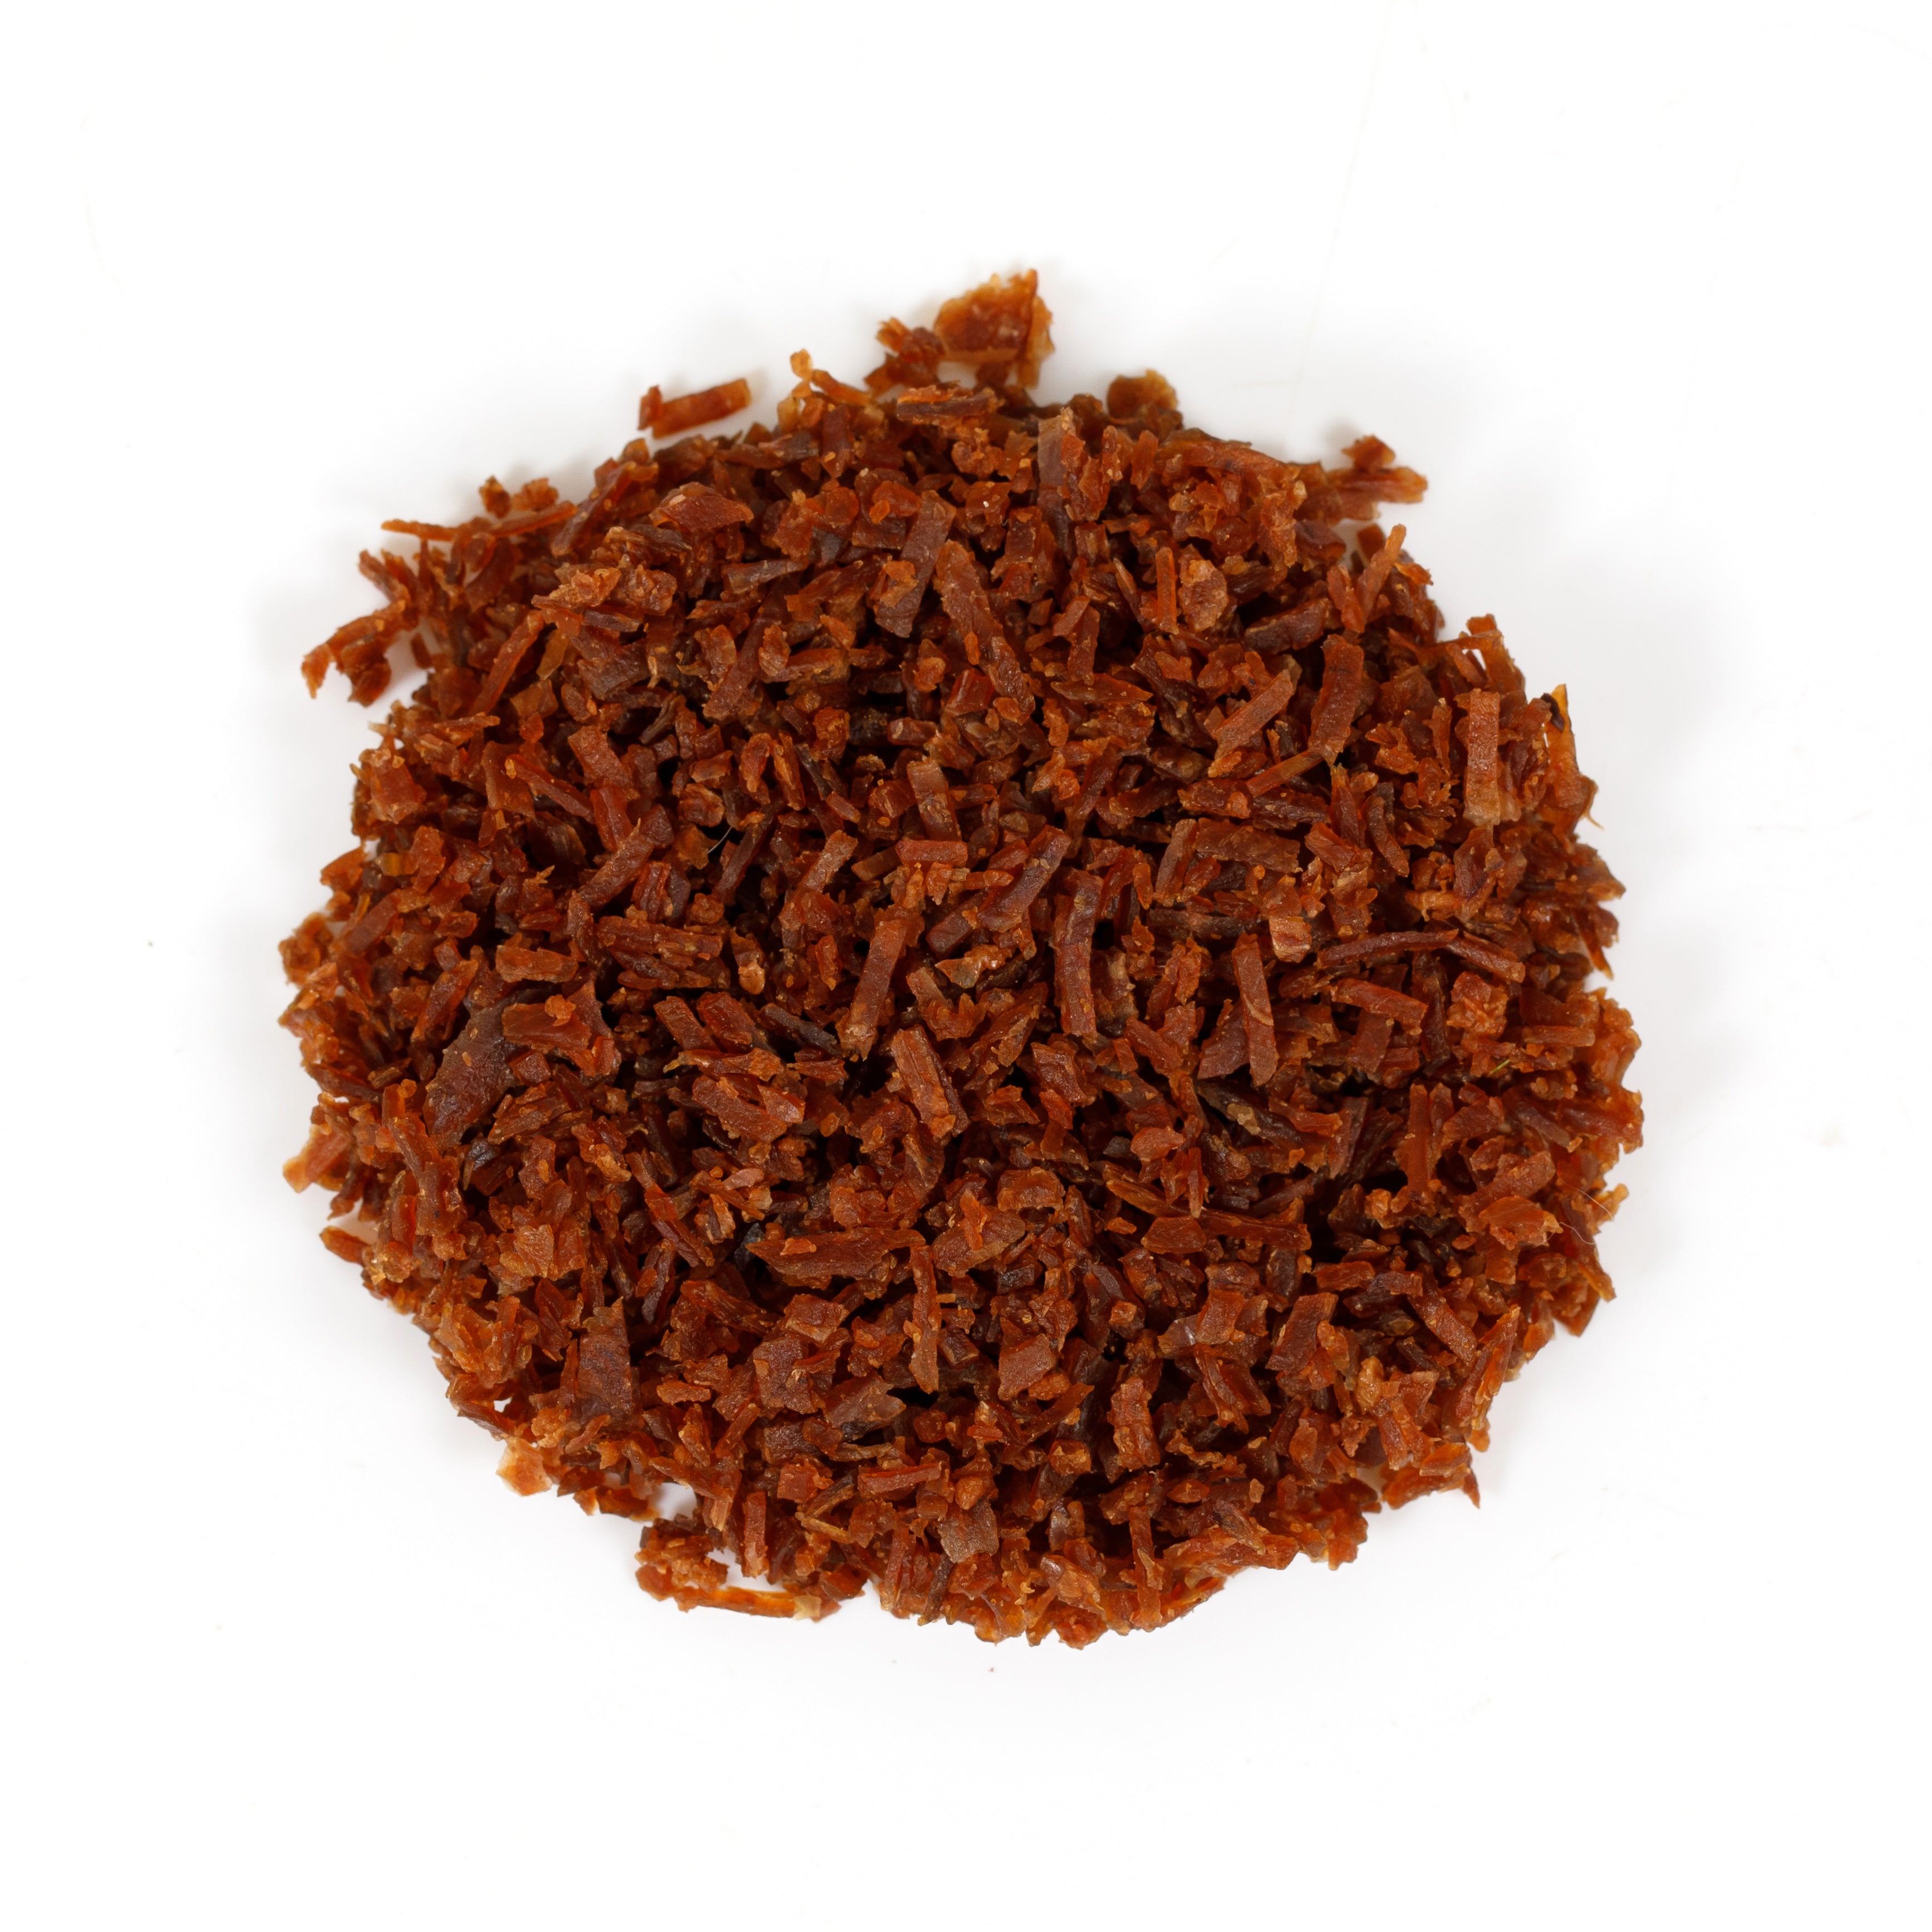 Rescue Apple Boost - Air-Dried Pieces 150g